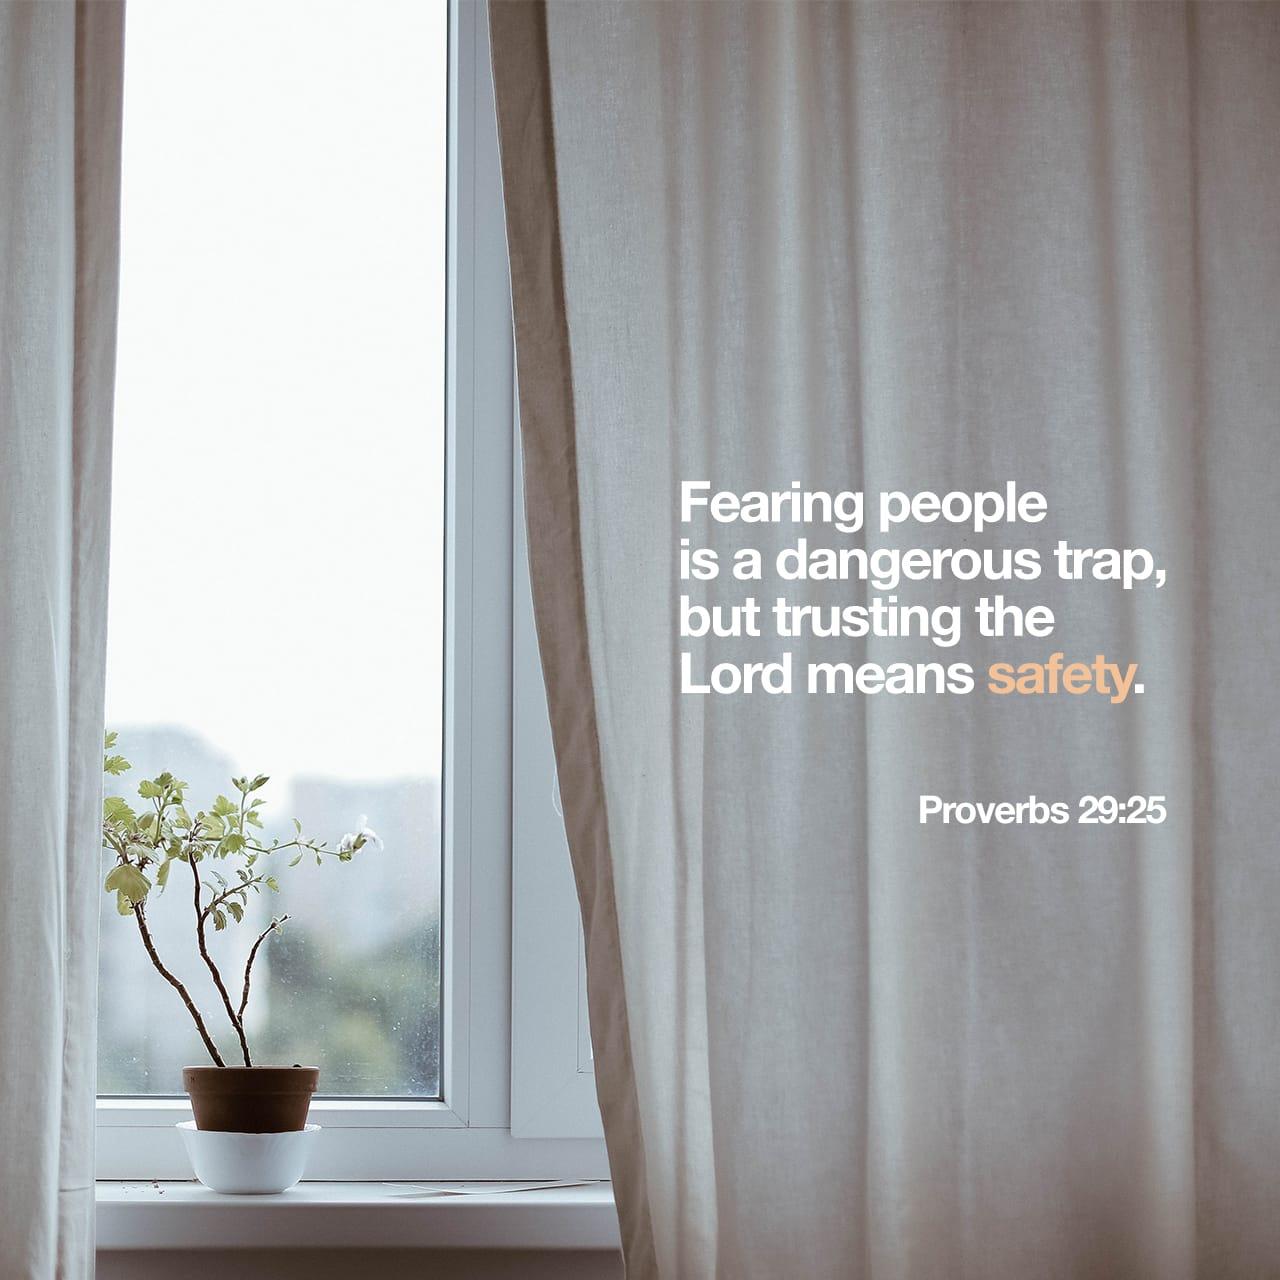 Bible Verse of the Day - day 88 - image 10776 (Proverbs 29:1-27)